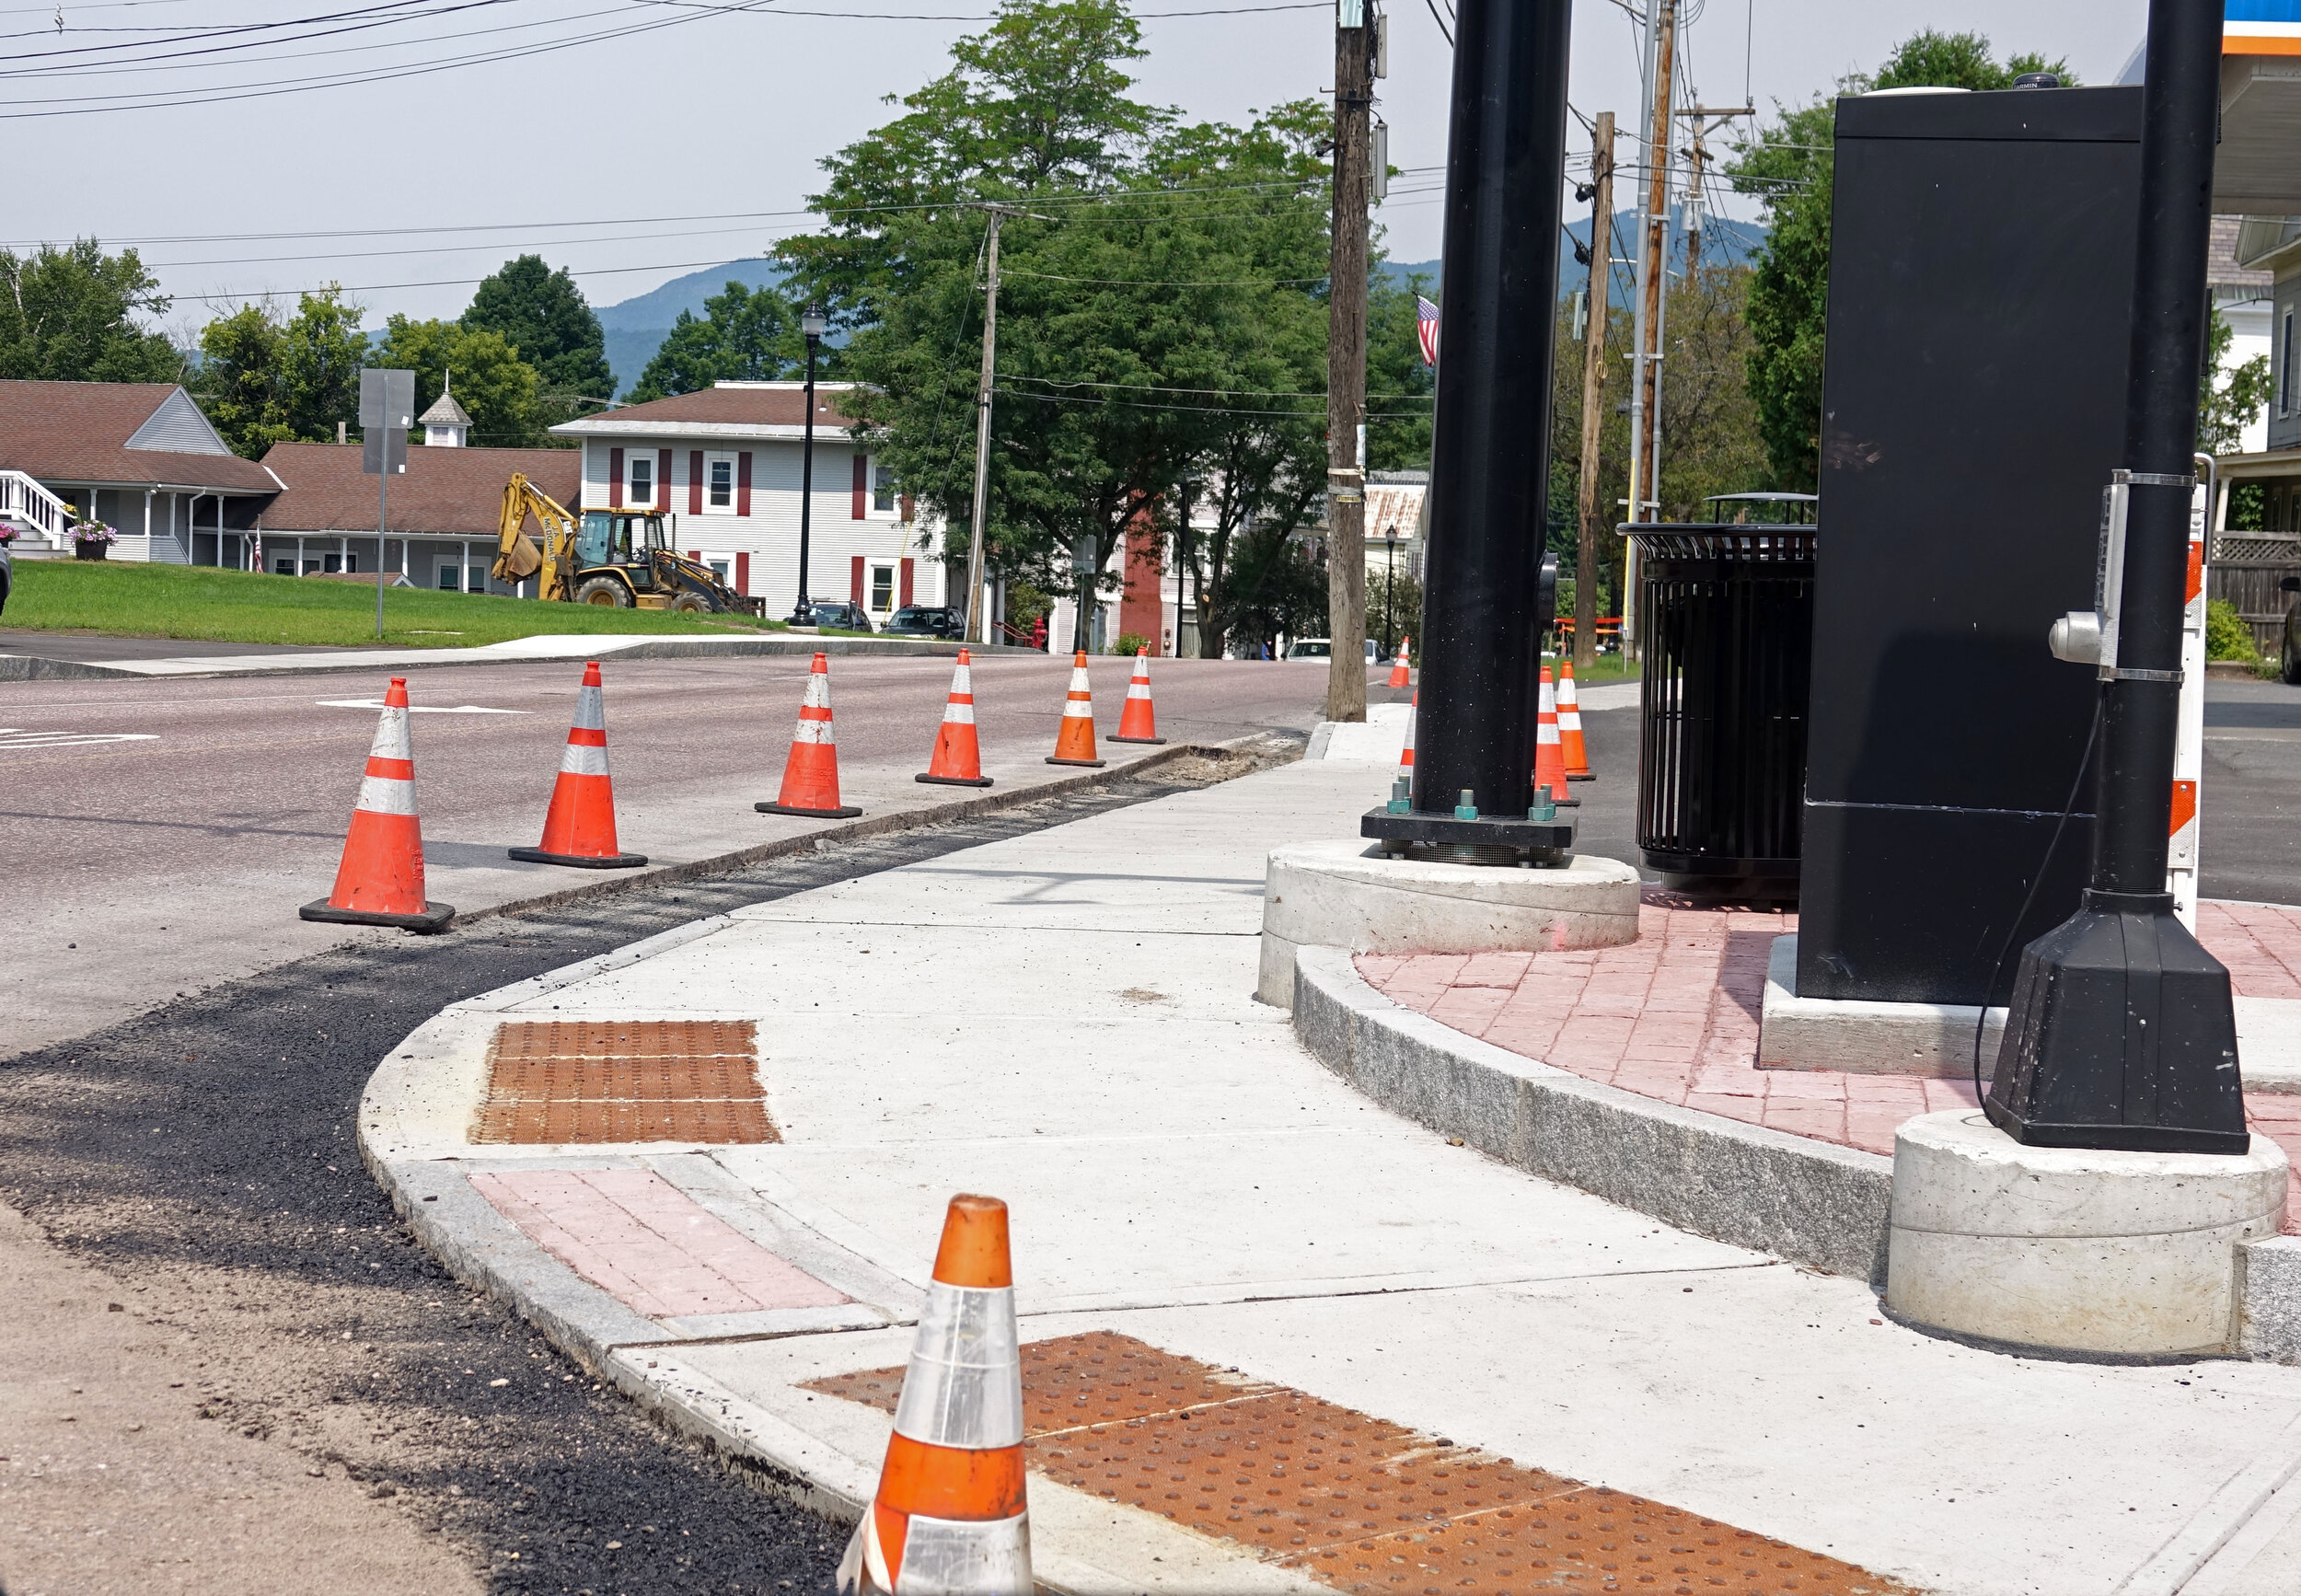   The sidewalk at the corner of Main and Stowe Street recently was completed with details to aid pedestrians. A new trash receptacle sits alongside the traffic signal post. Photo by Gordon Miller  